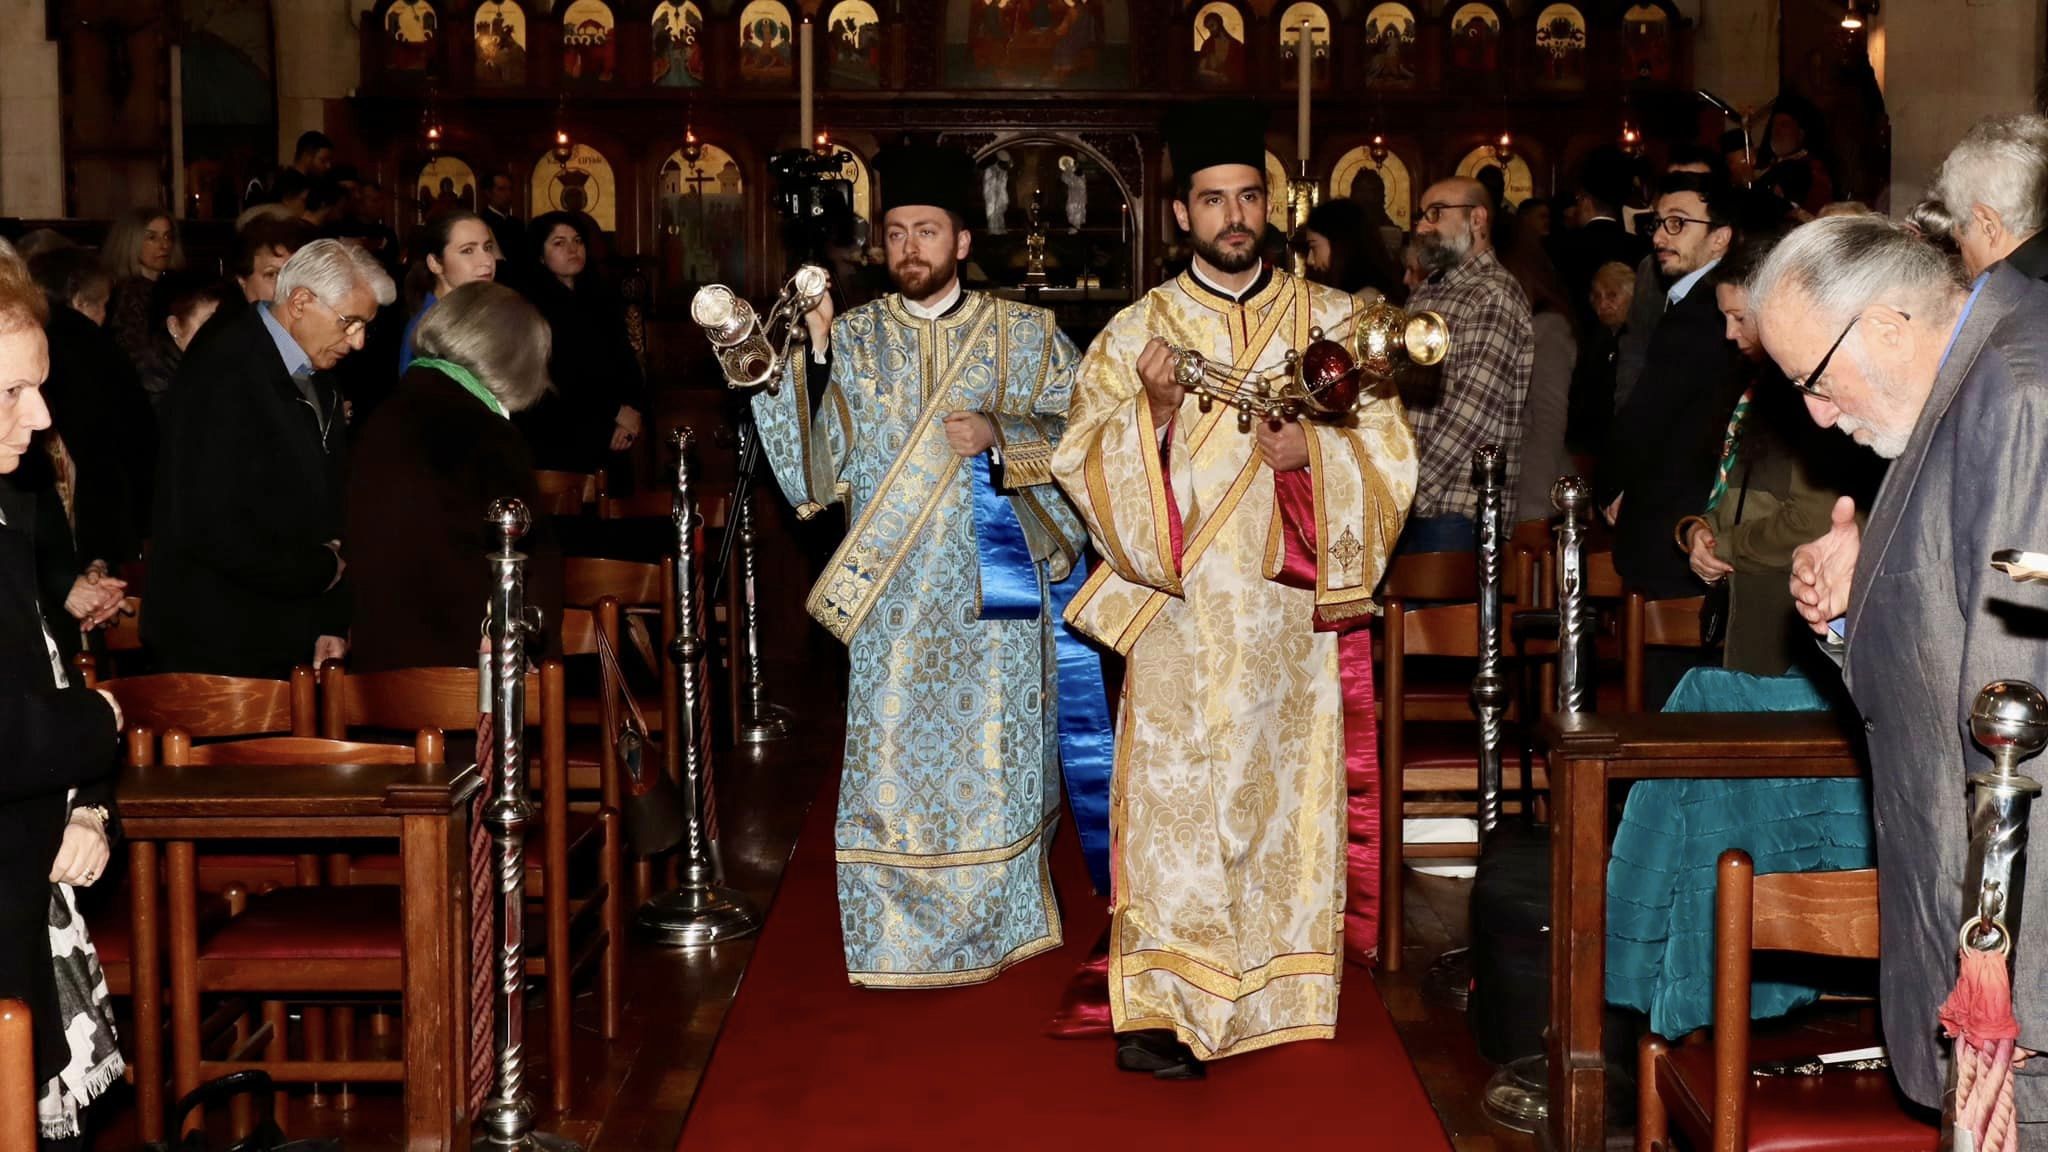 The Feast of the Three Hierarchs was celebrated with splendour in London